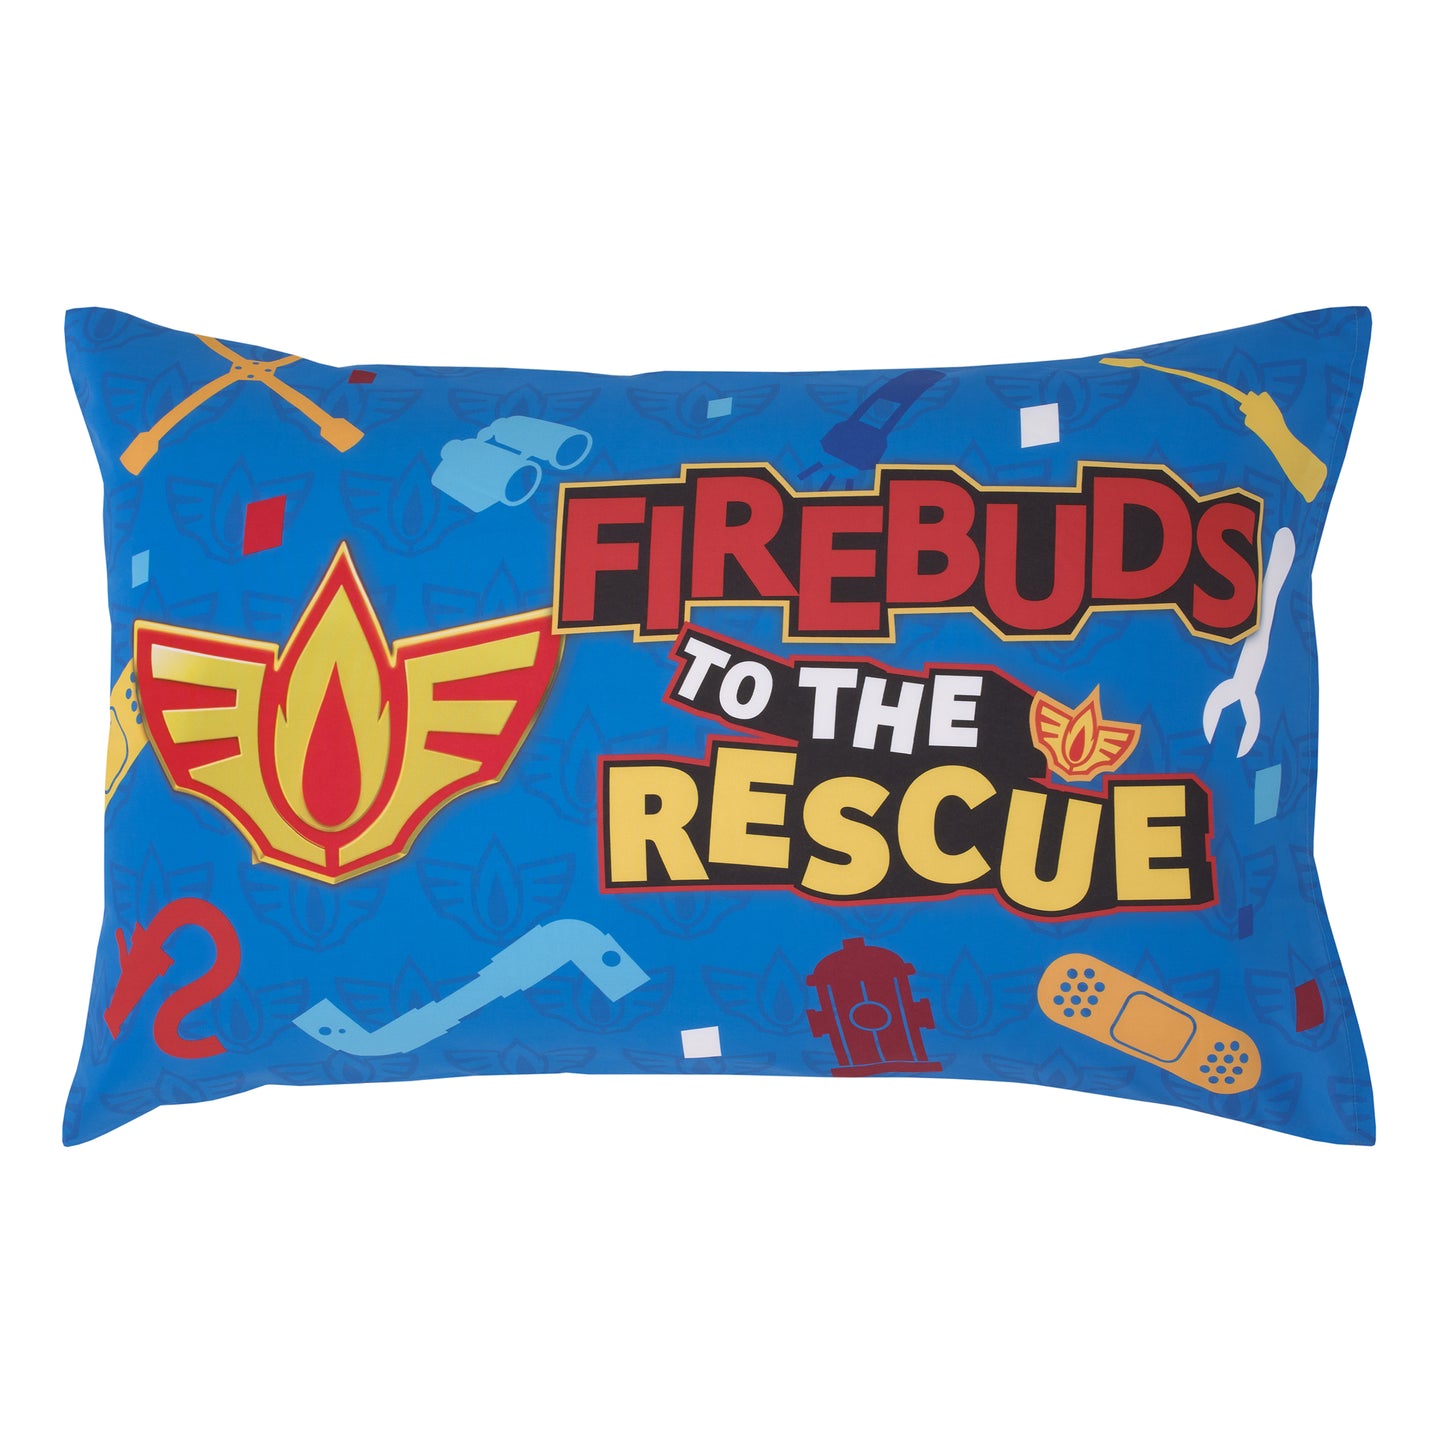 Disney Firebuds Let's Roll Red, Blue, and Yellow First Responders 4 Piece Toddler Bed Set - Comforter, Fitted Bottom Sheet, Flat Top Sheet, and Reversible Pillowcase